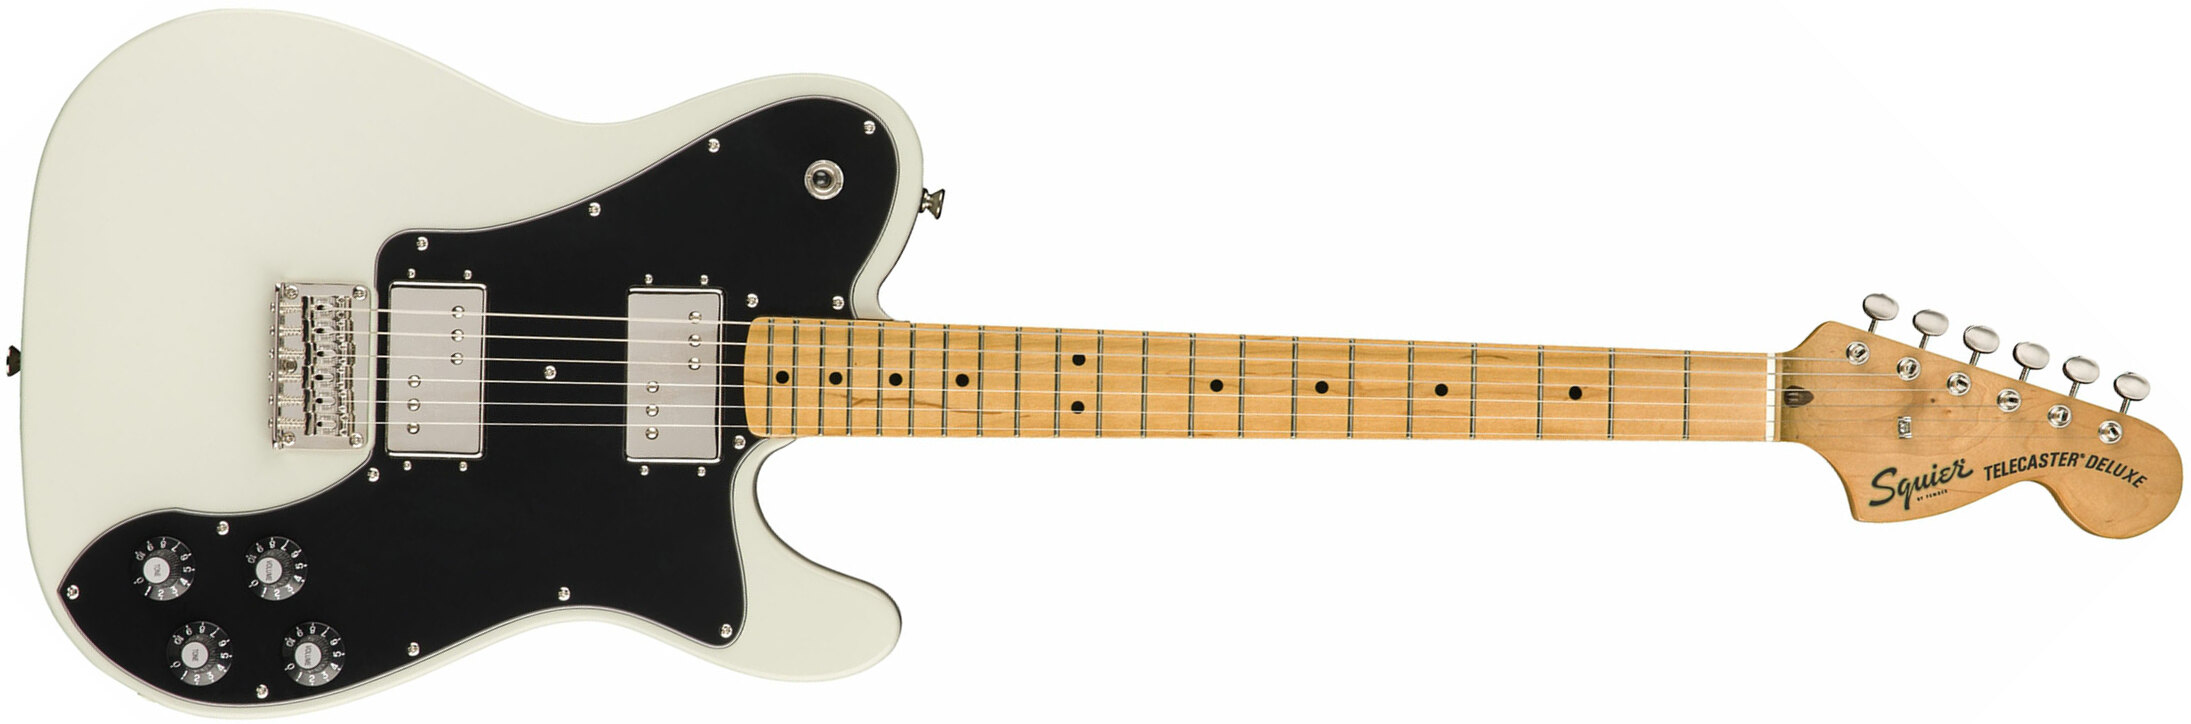 Squier Tele Deluxe Classic Vibe 70s 2019 Hh Mn - Olympic White - Guitare Électrique Forme Tel - Main picture